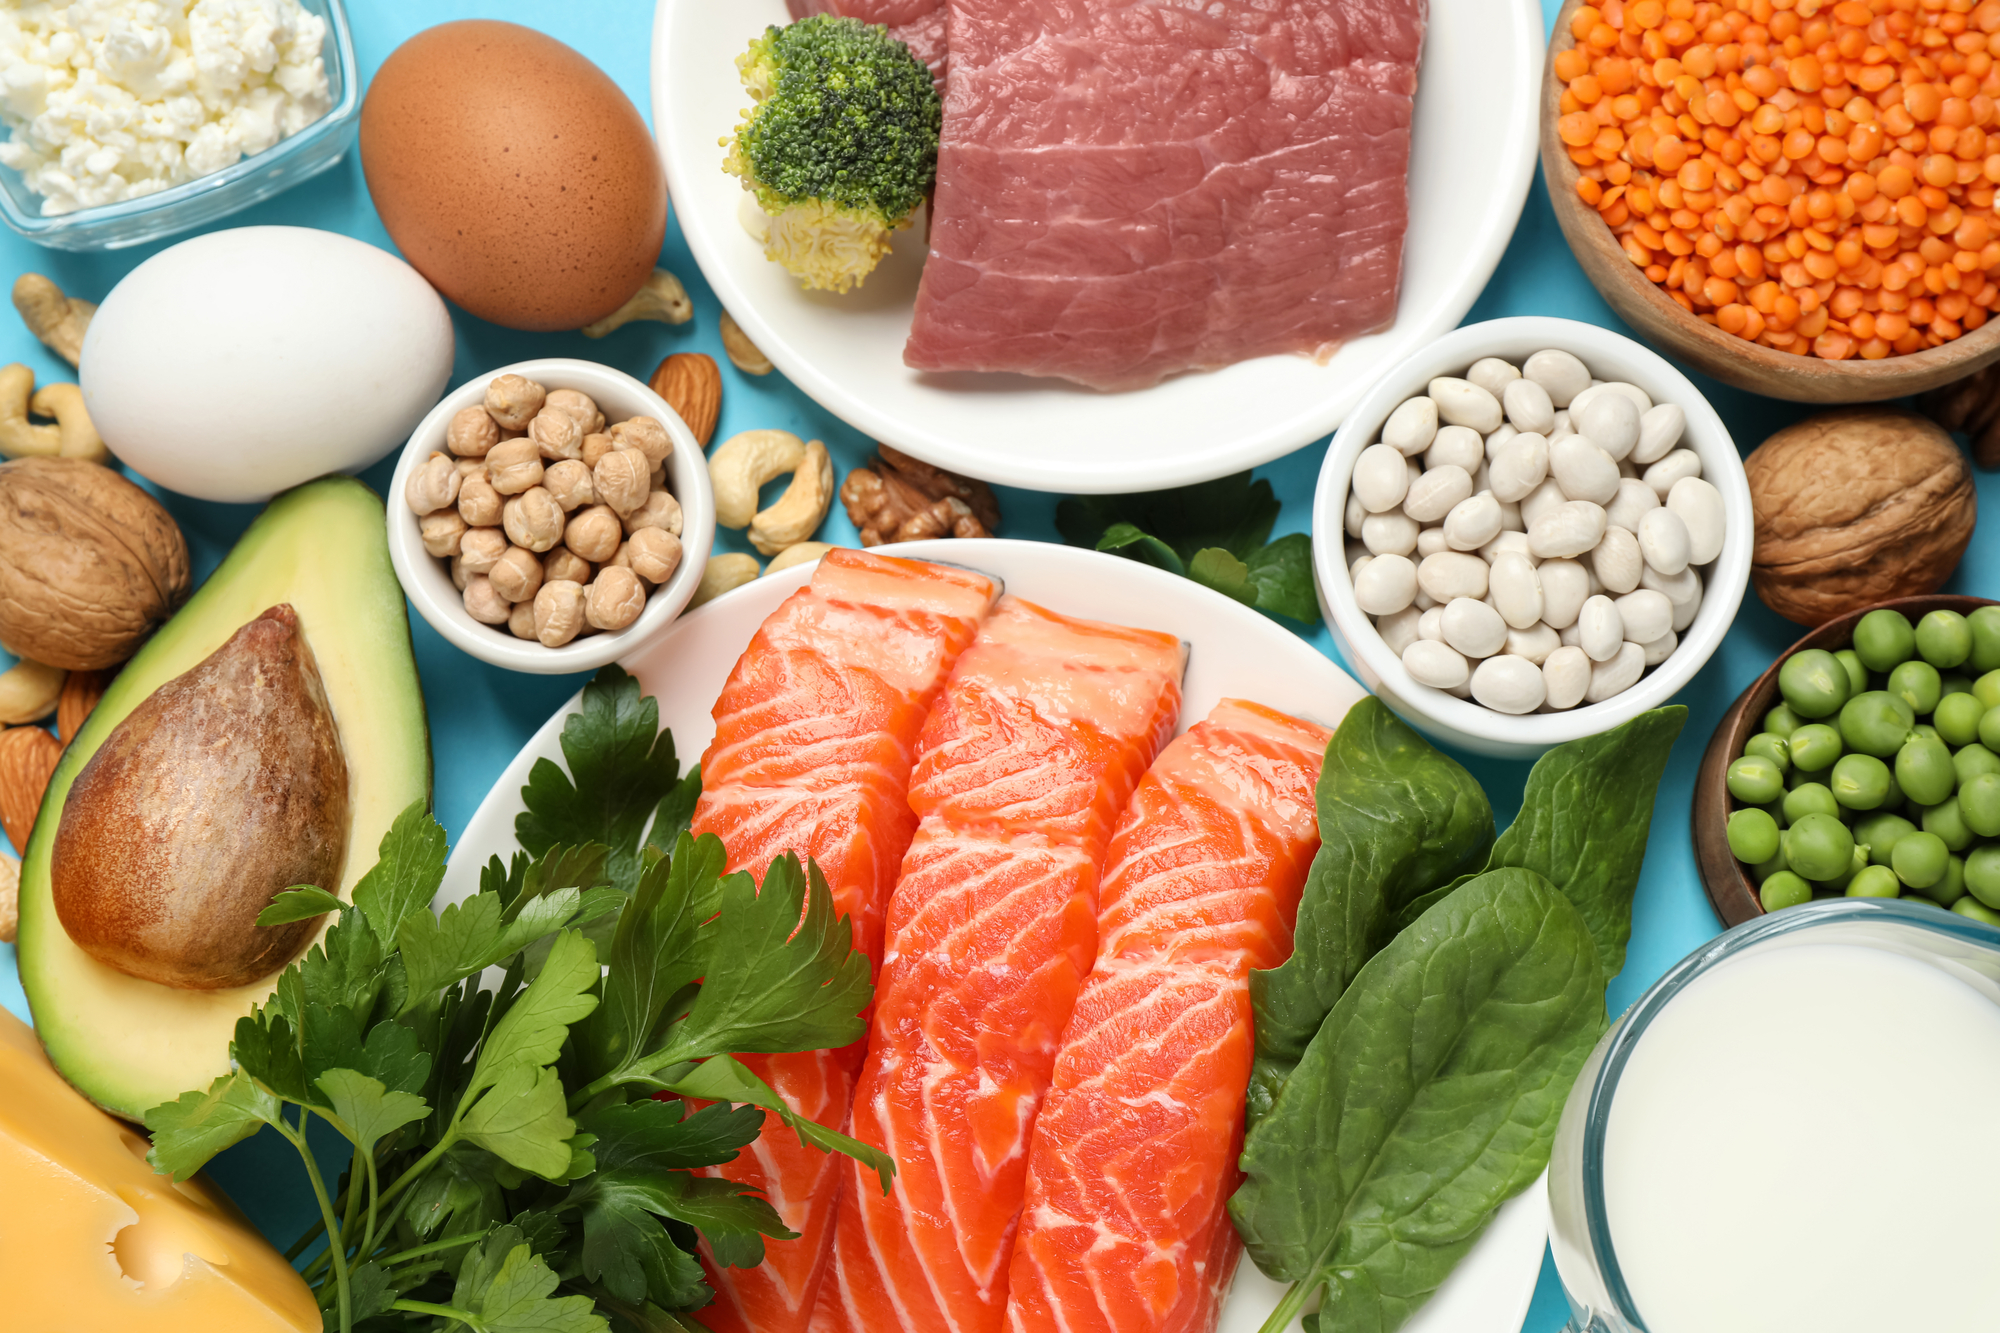 Dr. Landfair explains the importance and benefits of protein after surgery.